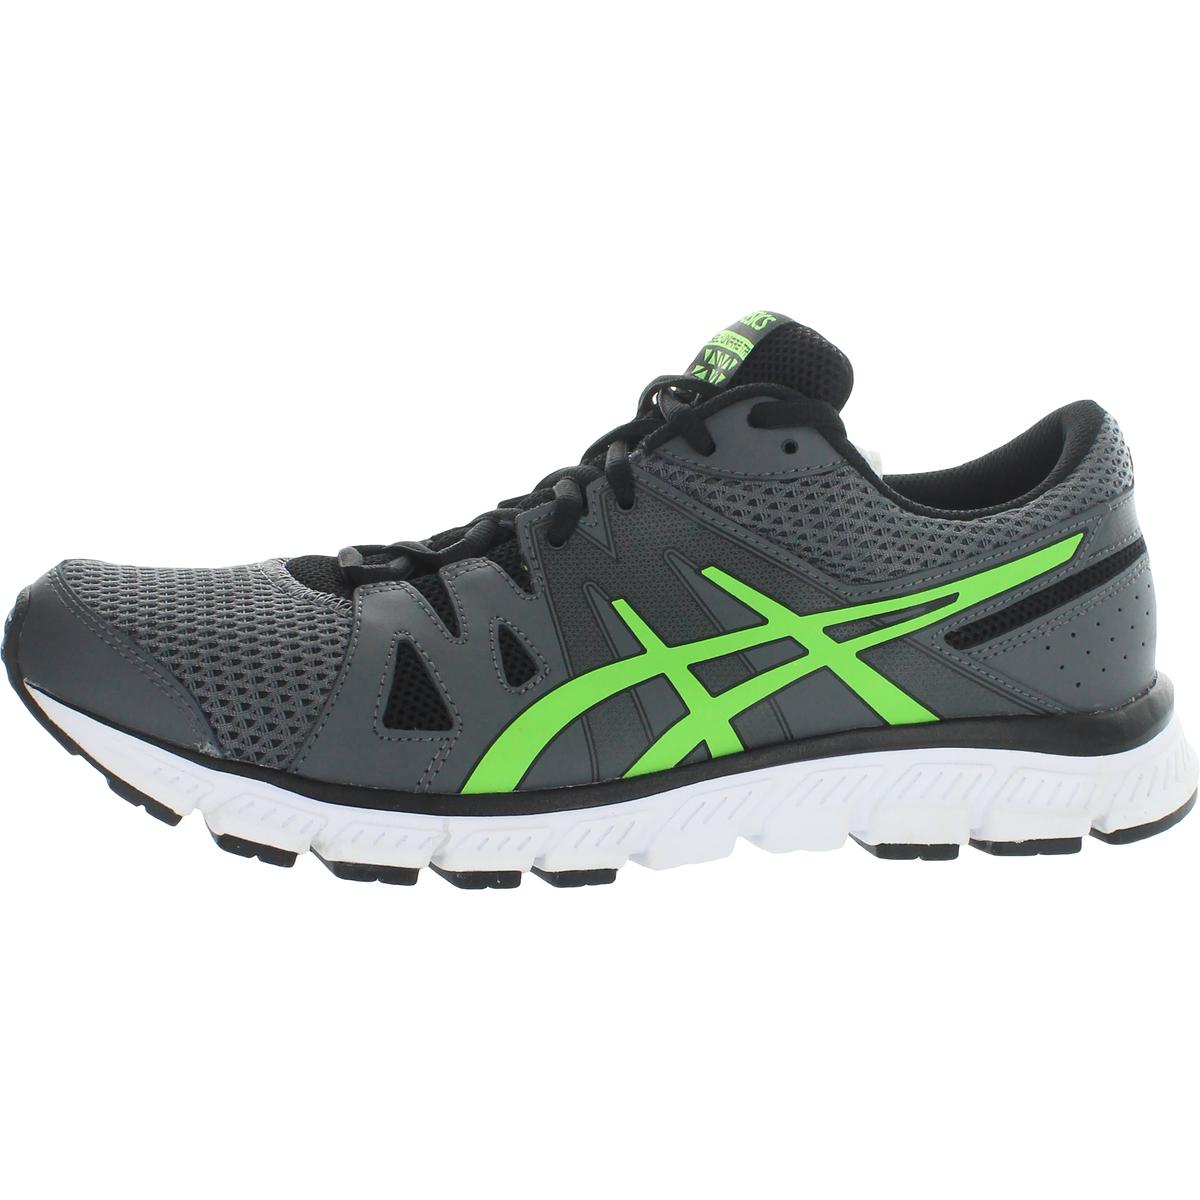 Asics Mens GEL- Unifire TR Leather Workout Trainers Sneakers Athletic ...